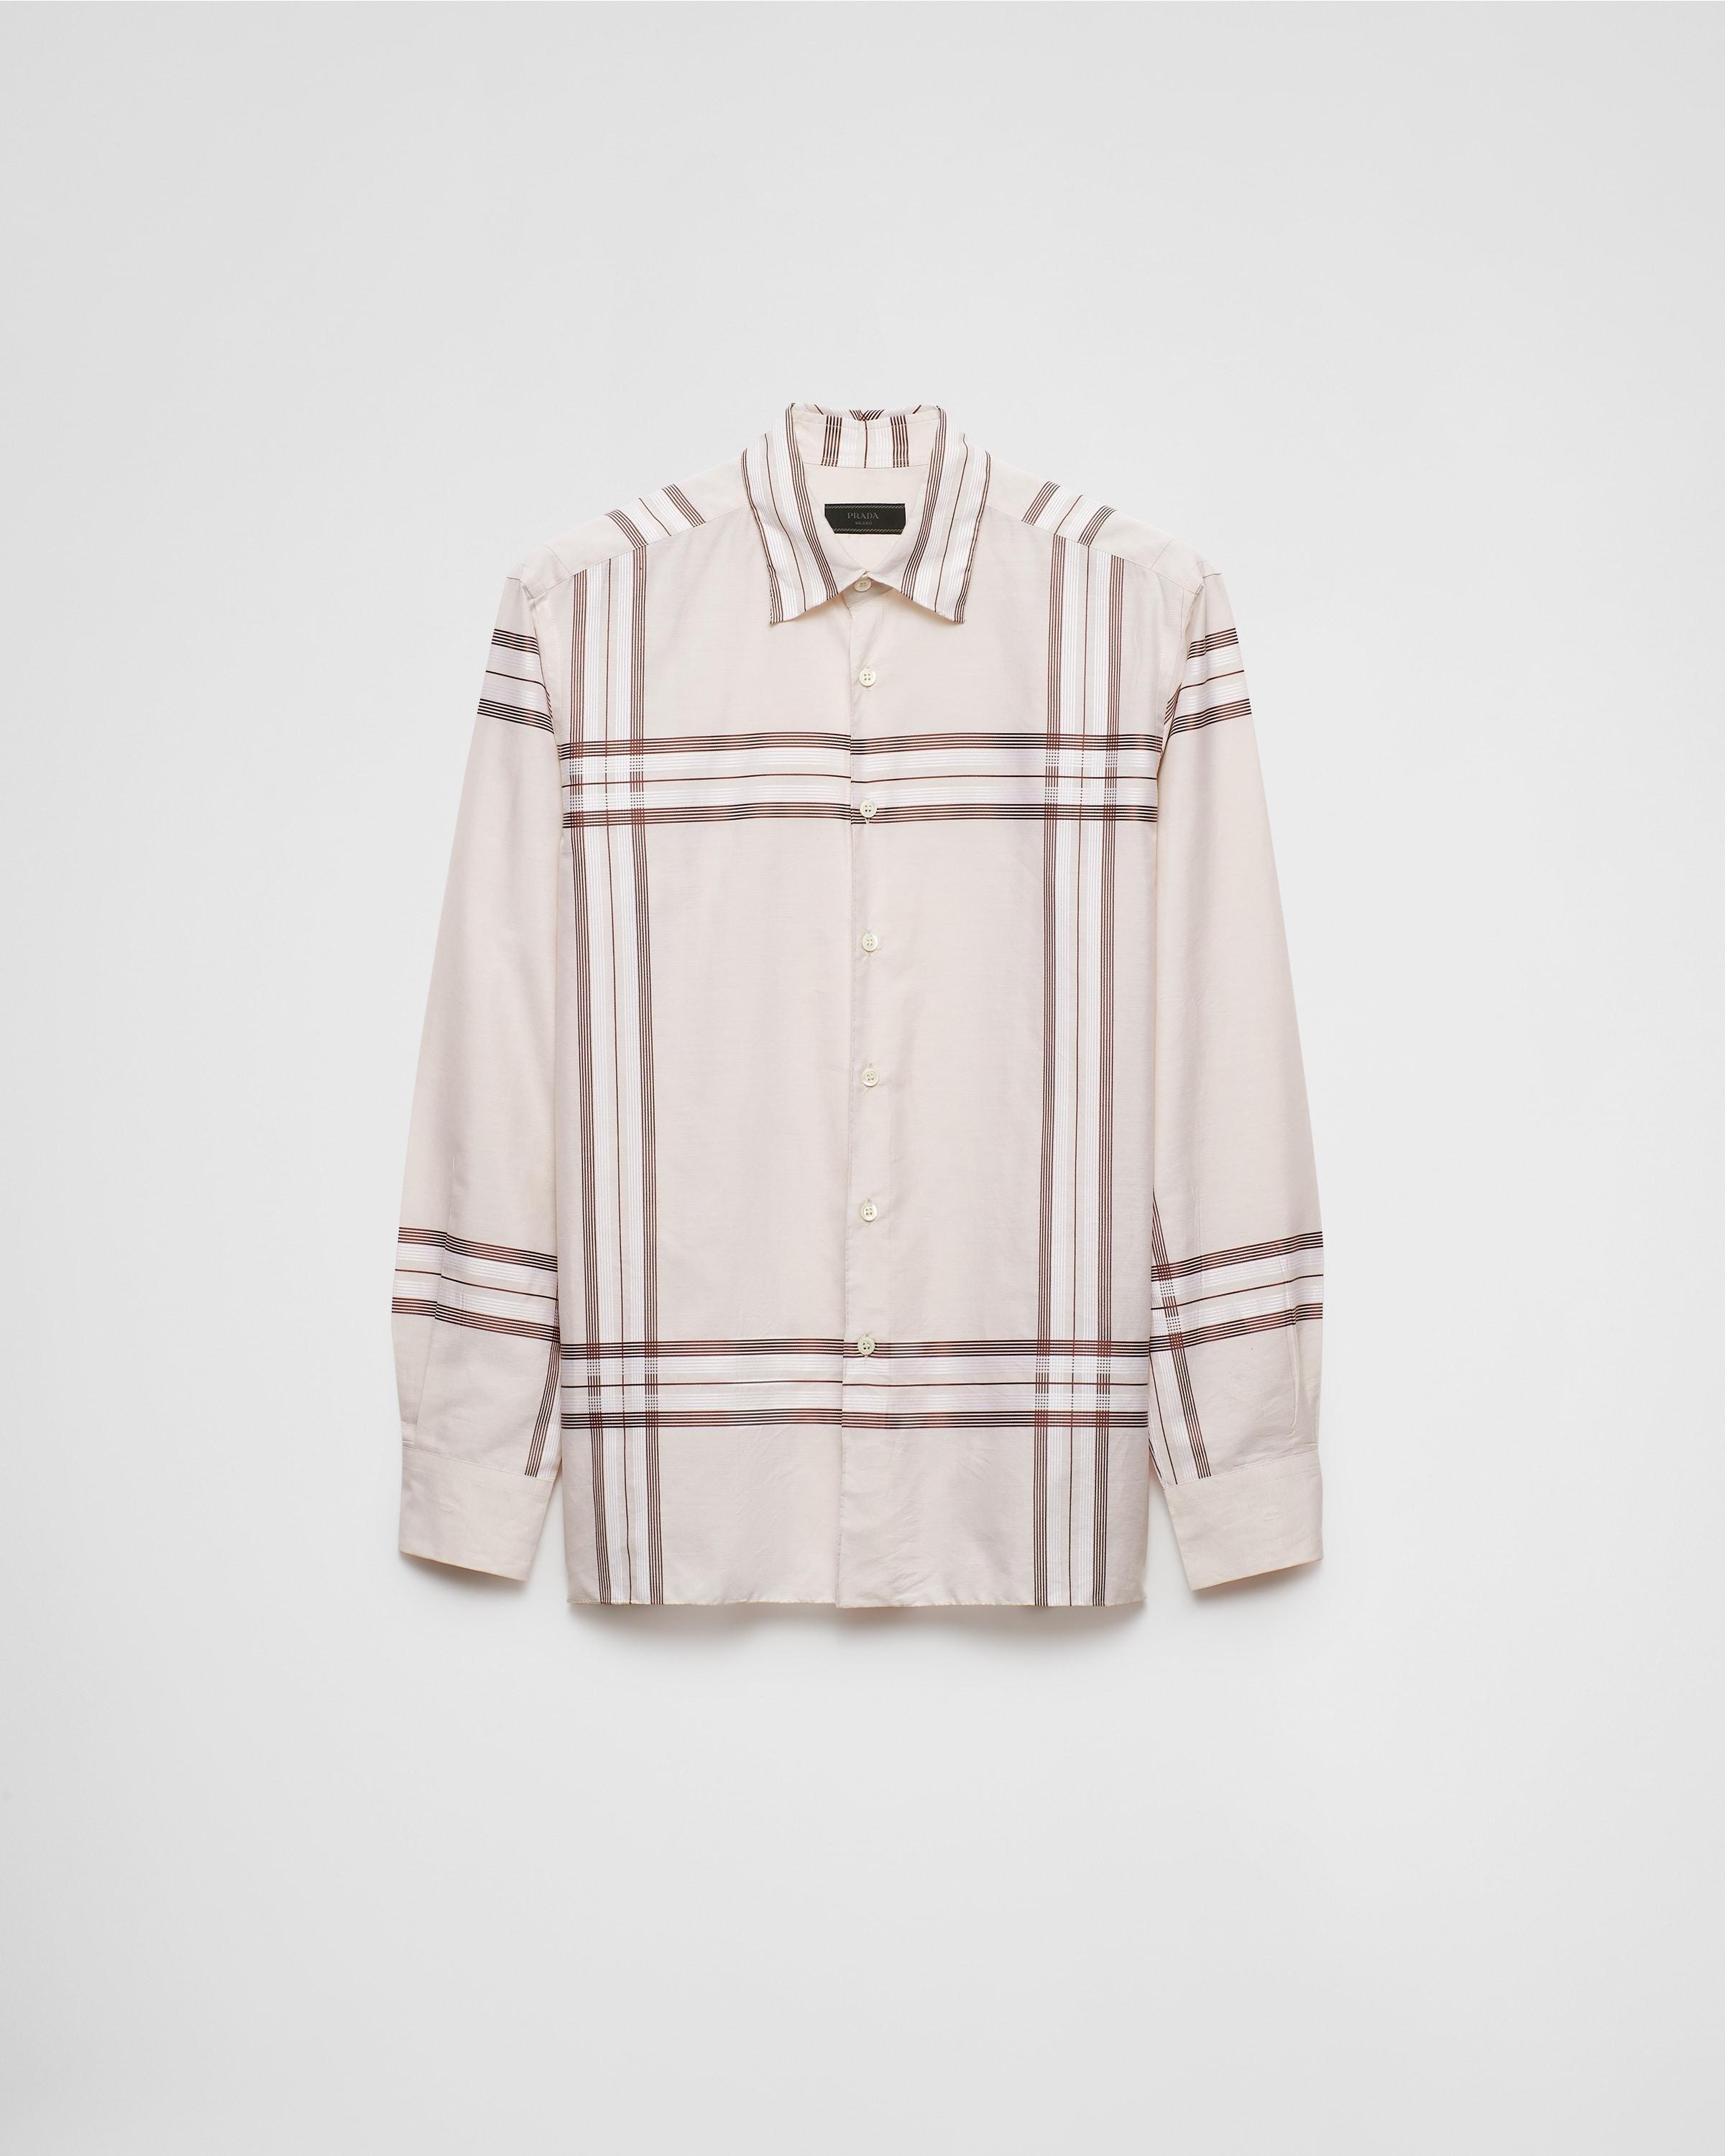 Checked cotton shirt Product Image